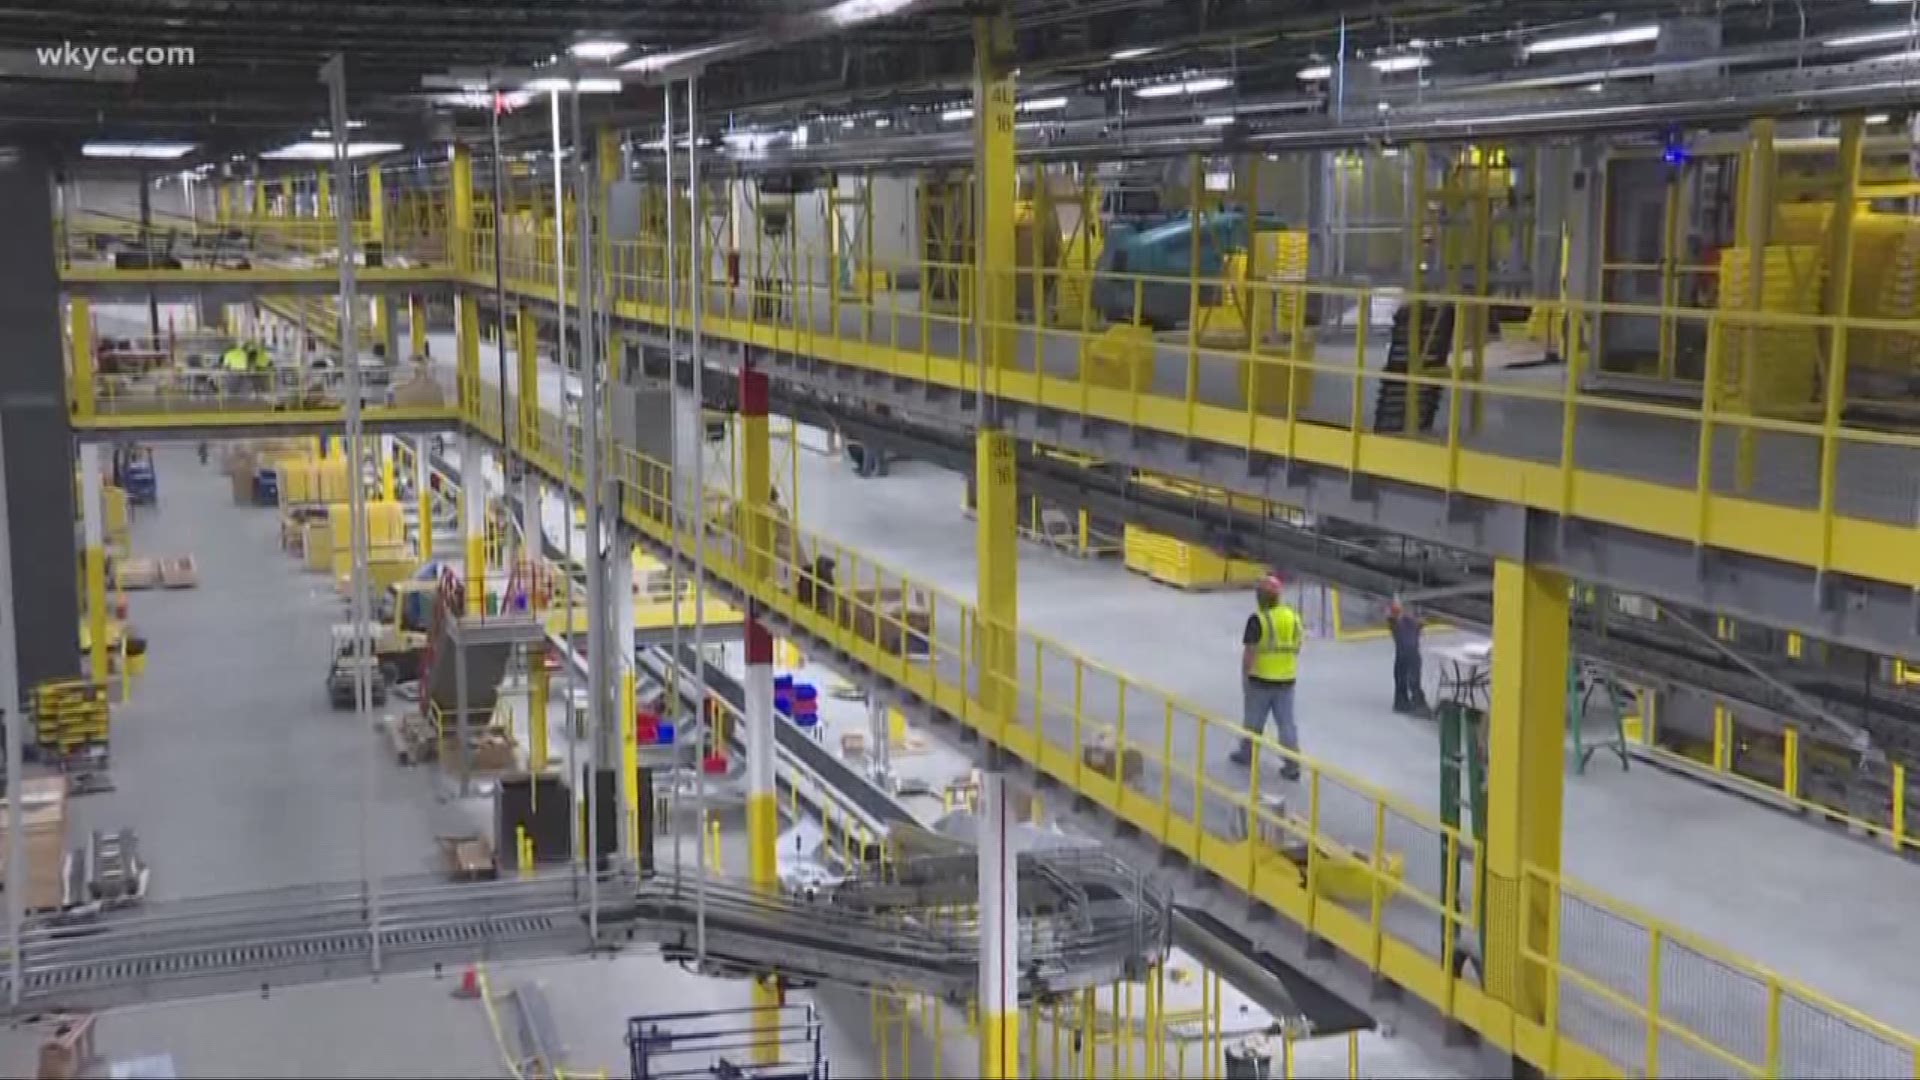 The retail brand on Monday announced more expansion plans for Ohio, including two new fulfillment centers in Akron and Rossford. According to a news release from Amazon, the fulfillment centers are expected to create more than 2,500 full-time jobs.